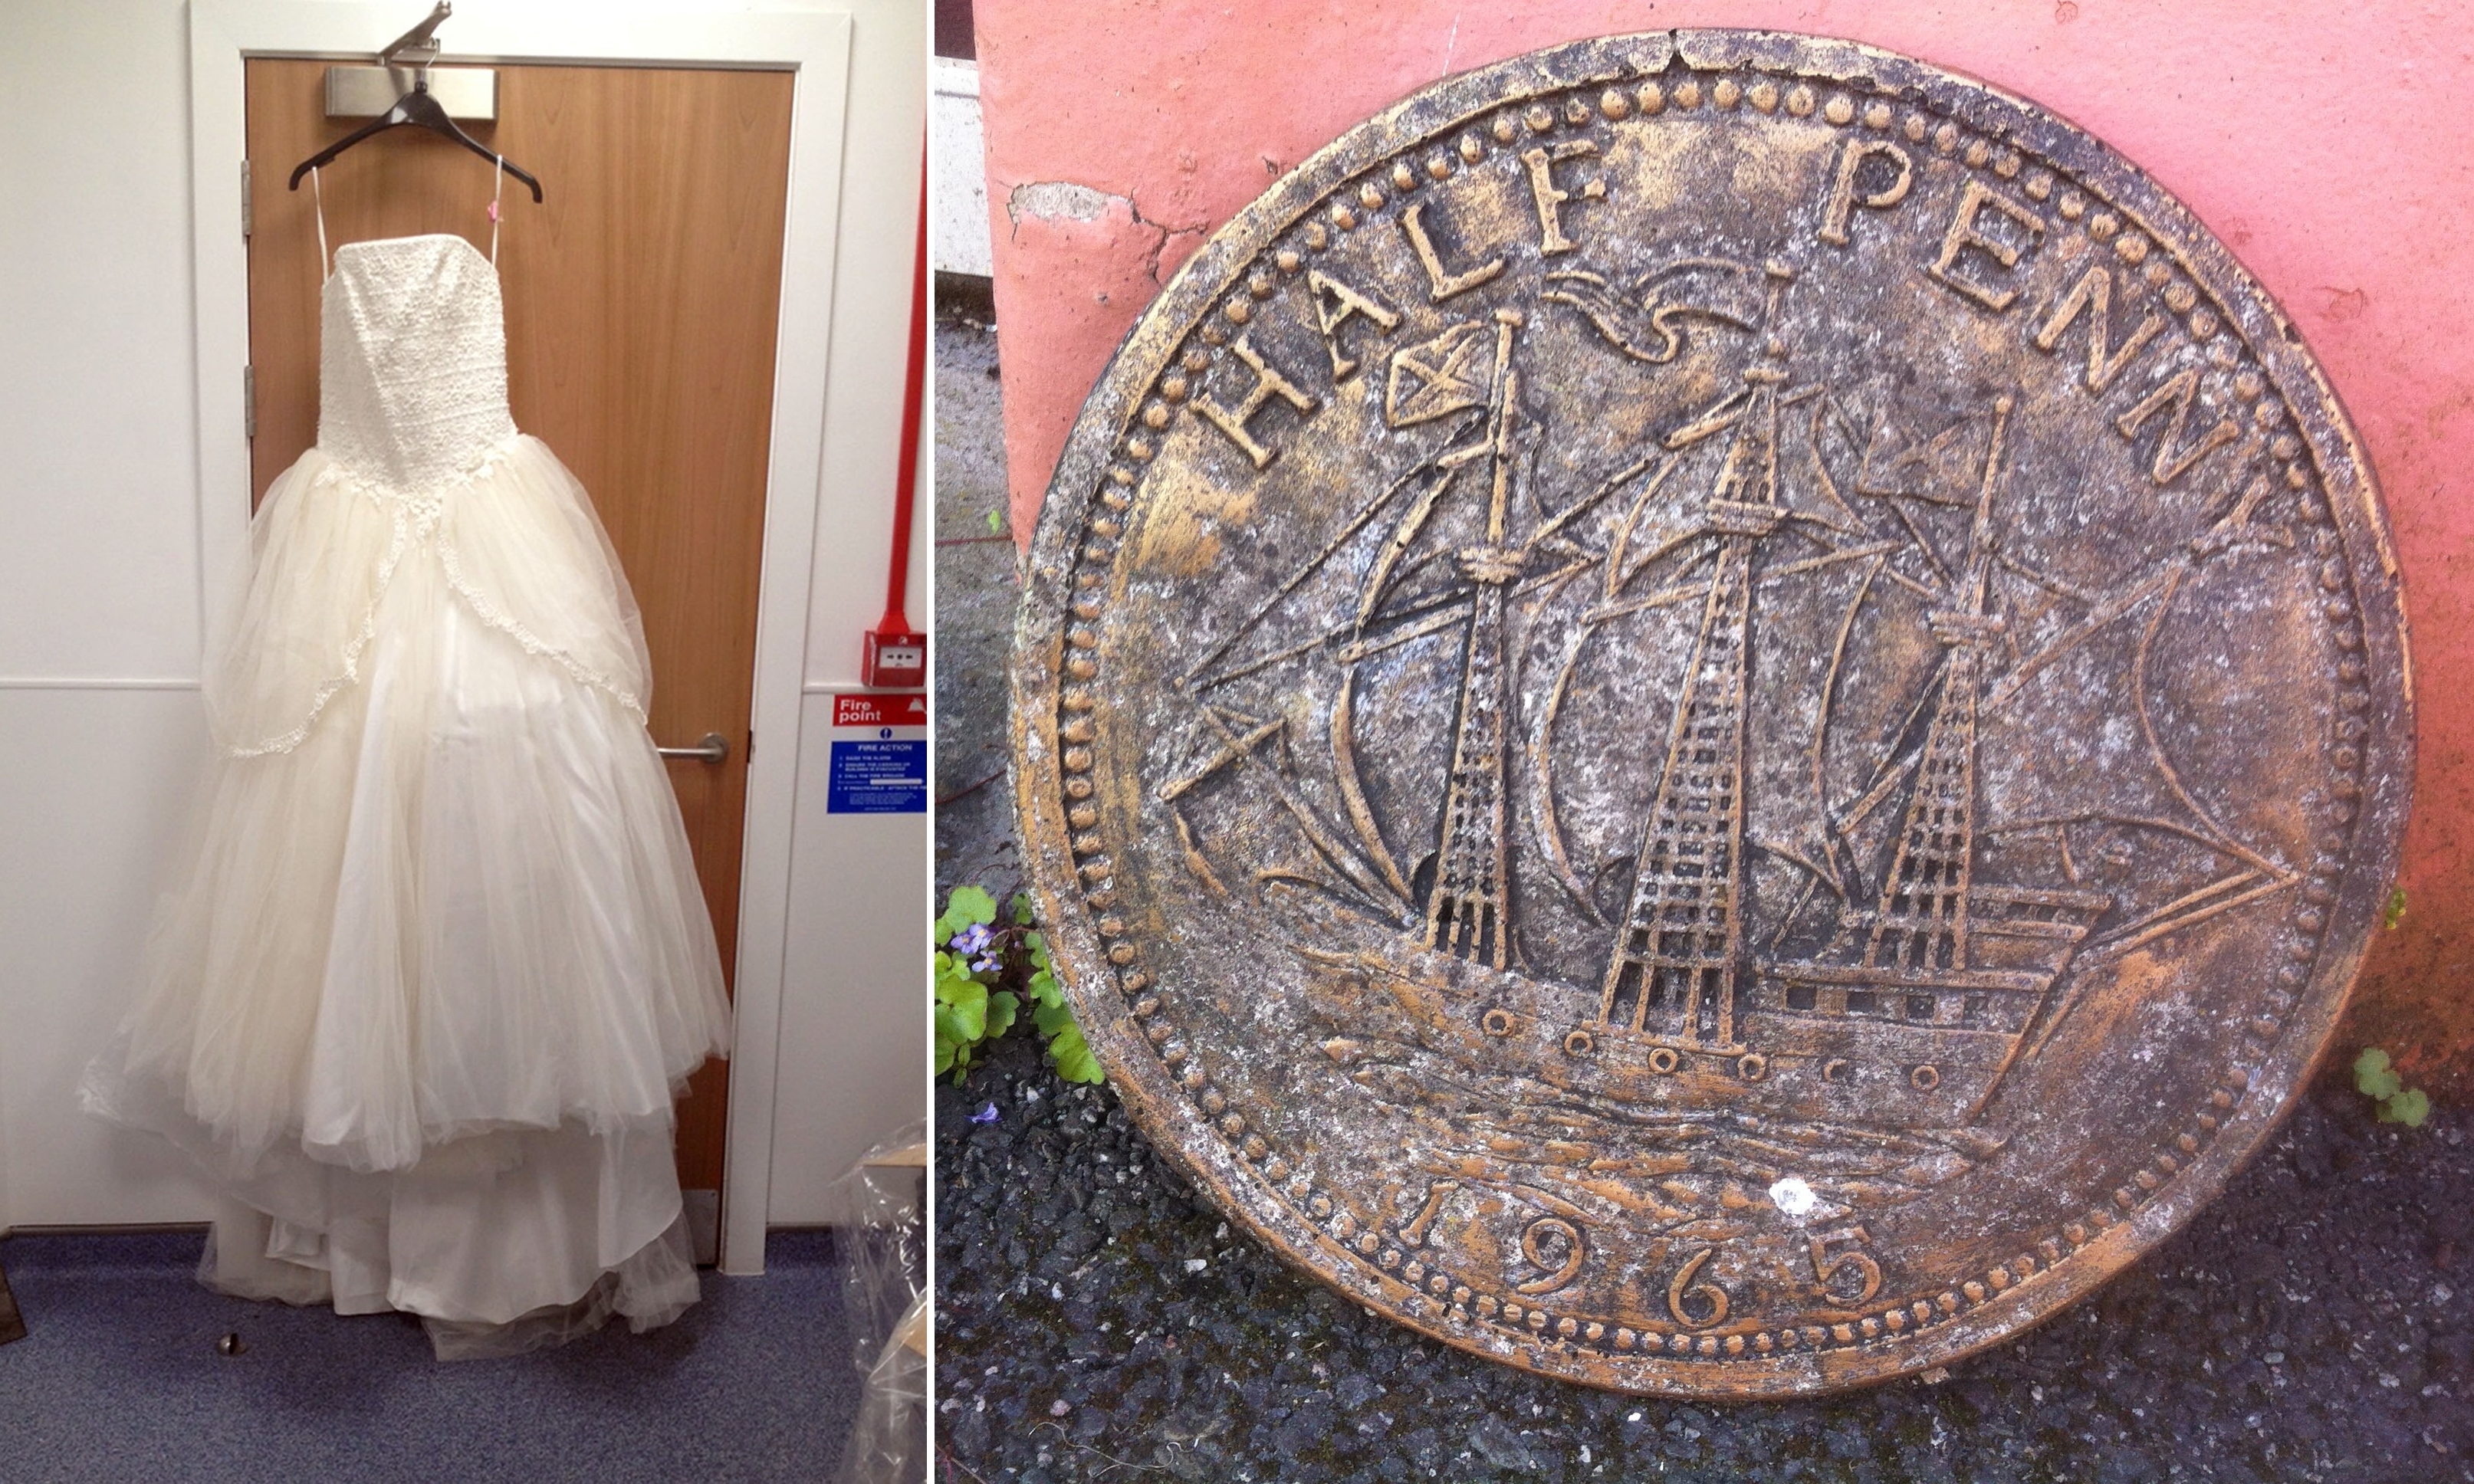 A wedding dress and an ornamental stone are amongst the items handed in to police.